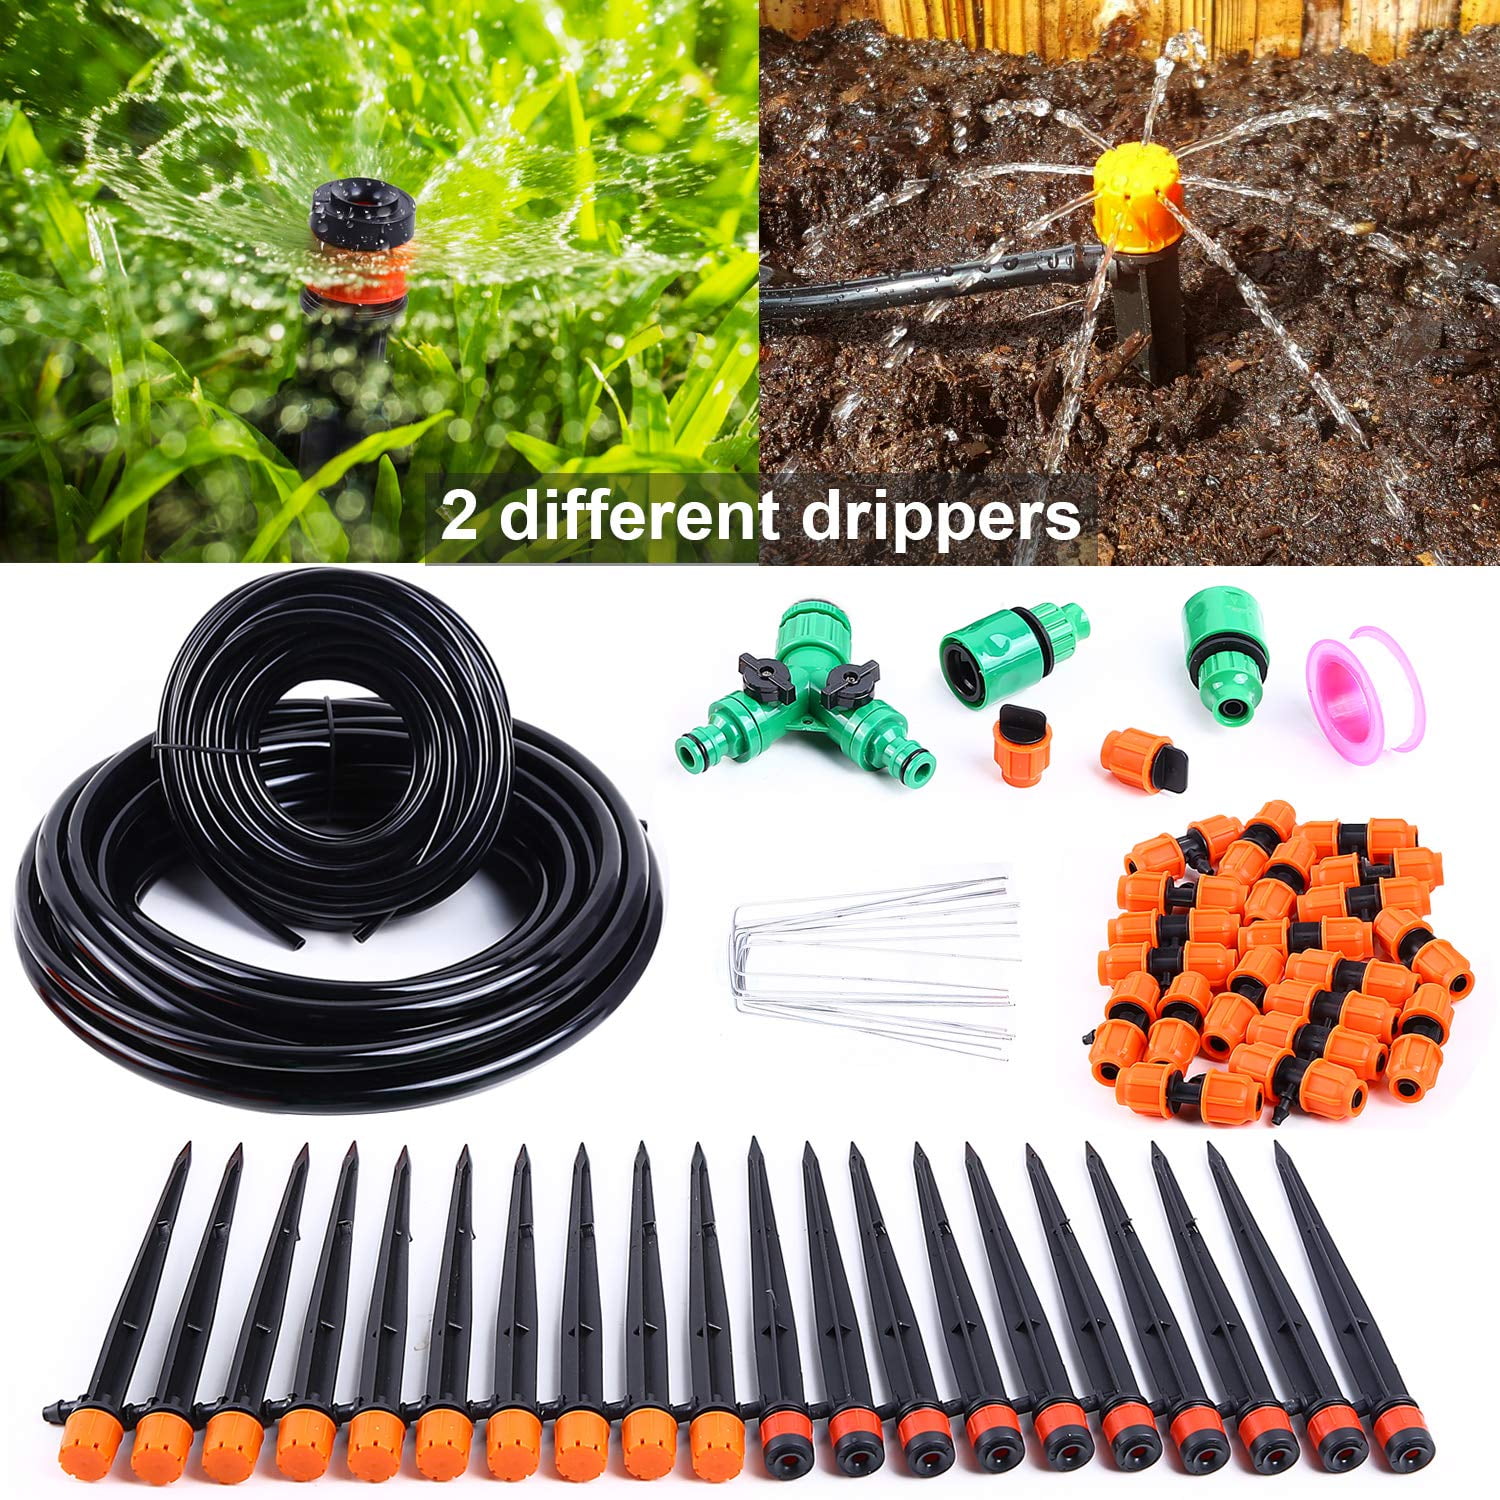 30M DIY Micro Drip Irrigation Kit System Hose Drippers Garden Plant Watering 